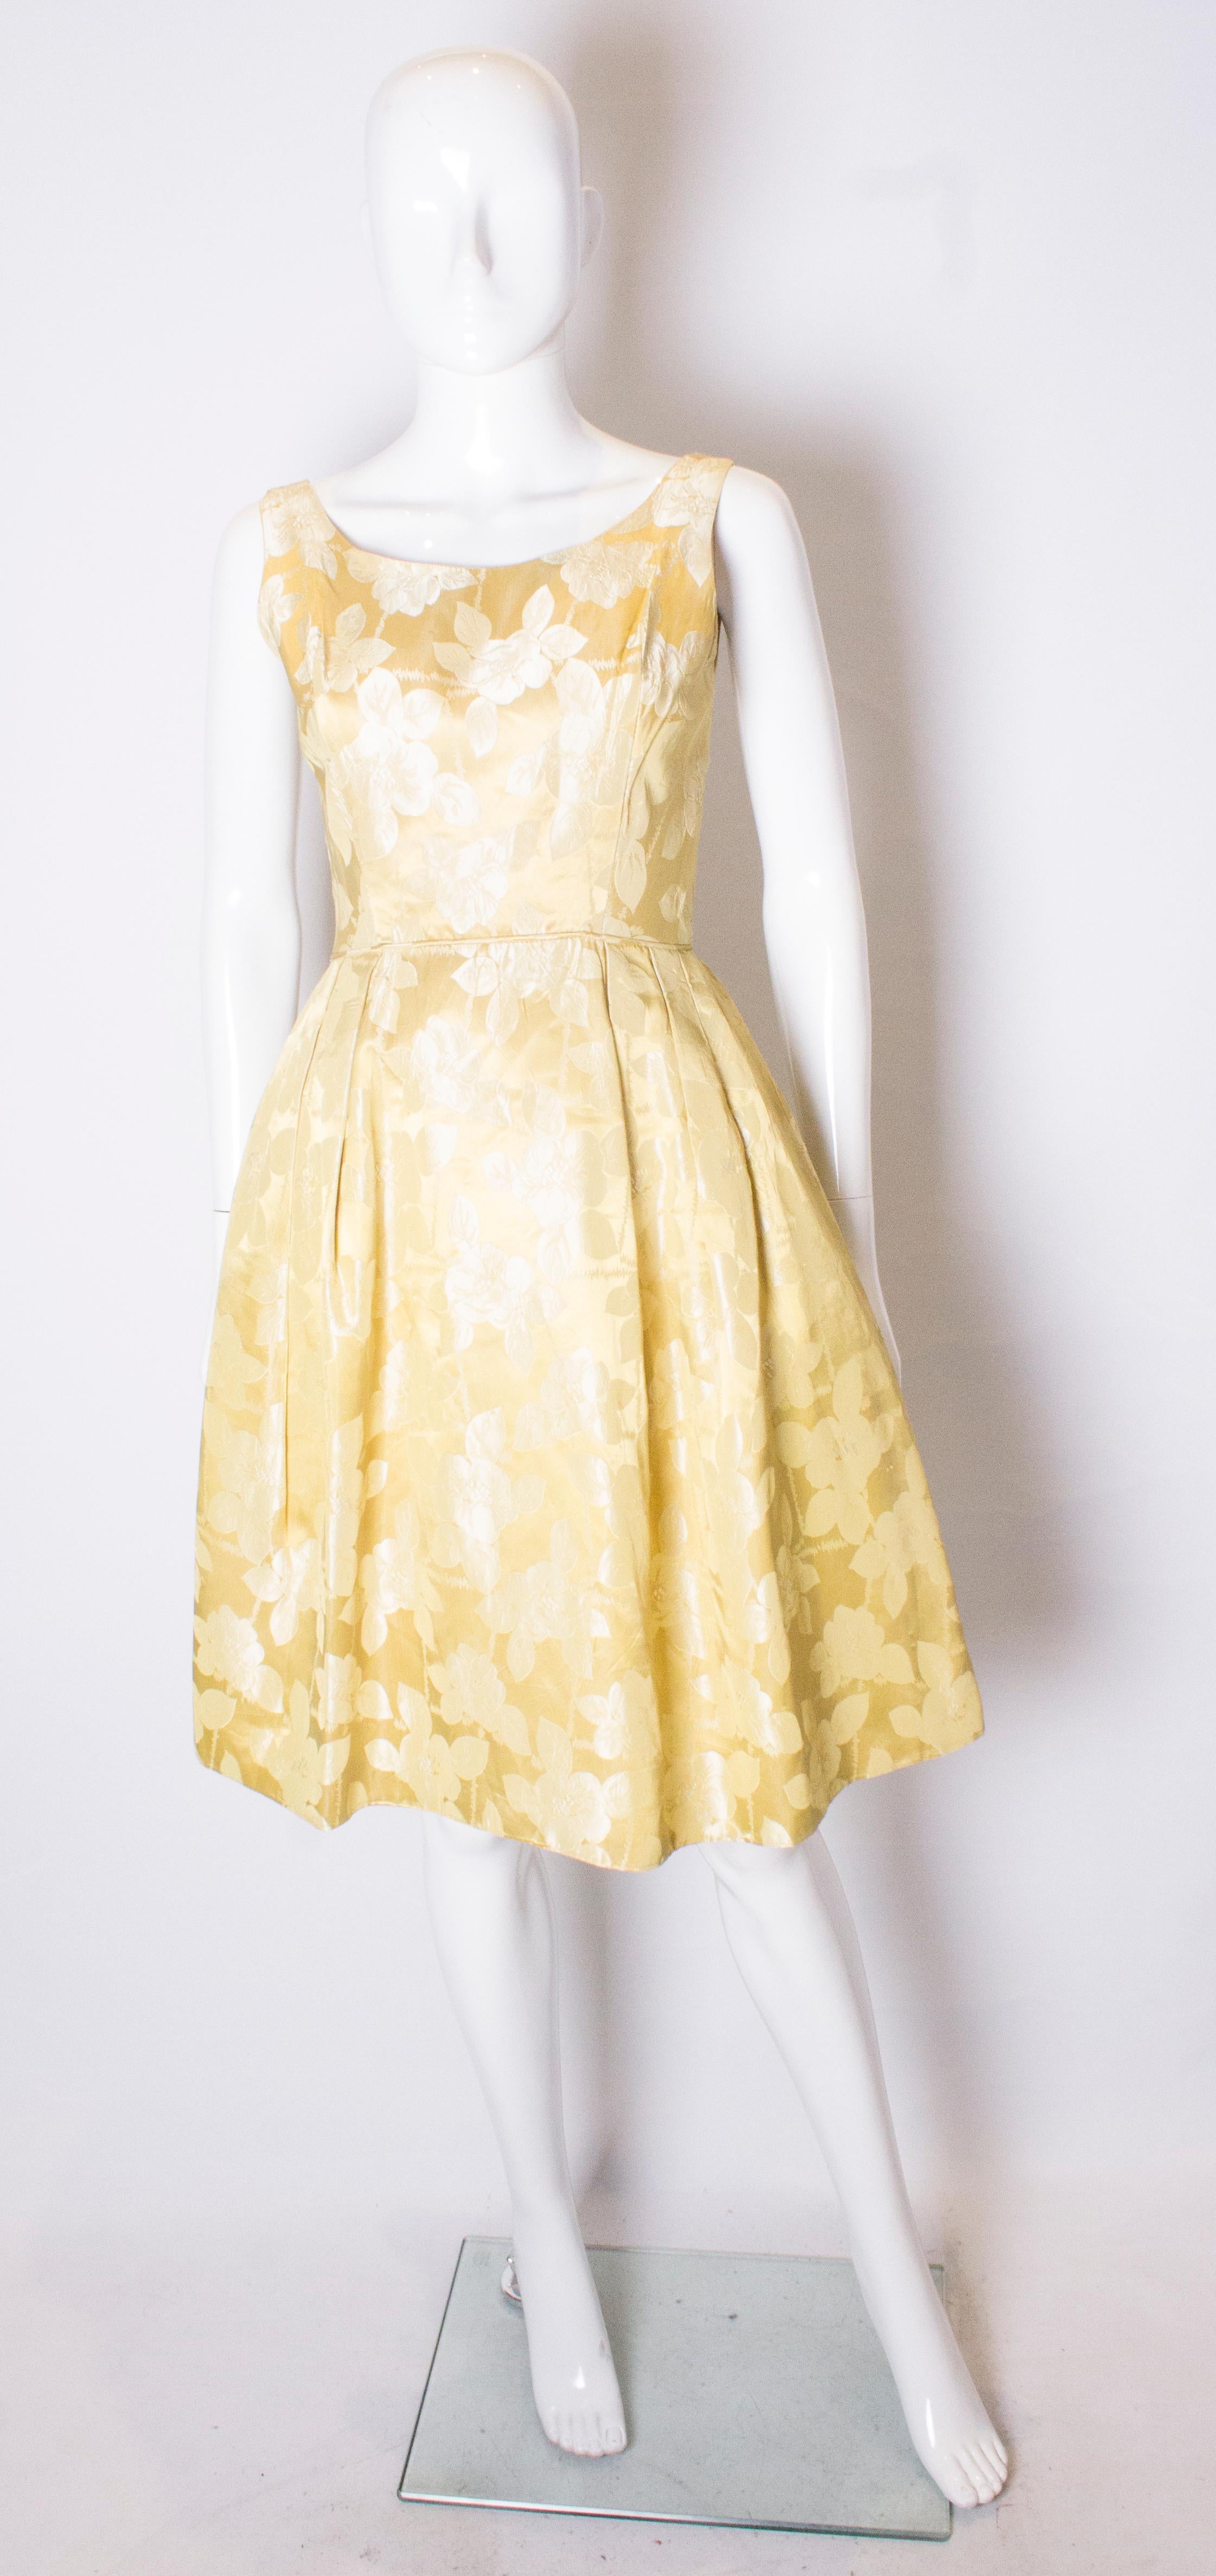 A chic vintage cocktail dress in a pretty yellow/gold colour . The dress has a scoop neckline, front and back with small gathering at the waist. It is fully lined with a central back zip and an net underskirt.